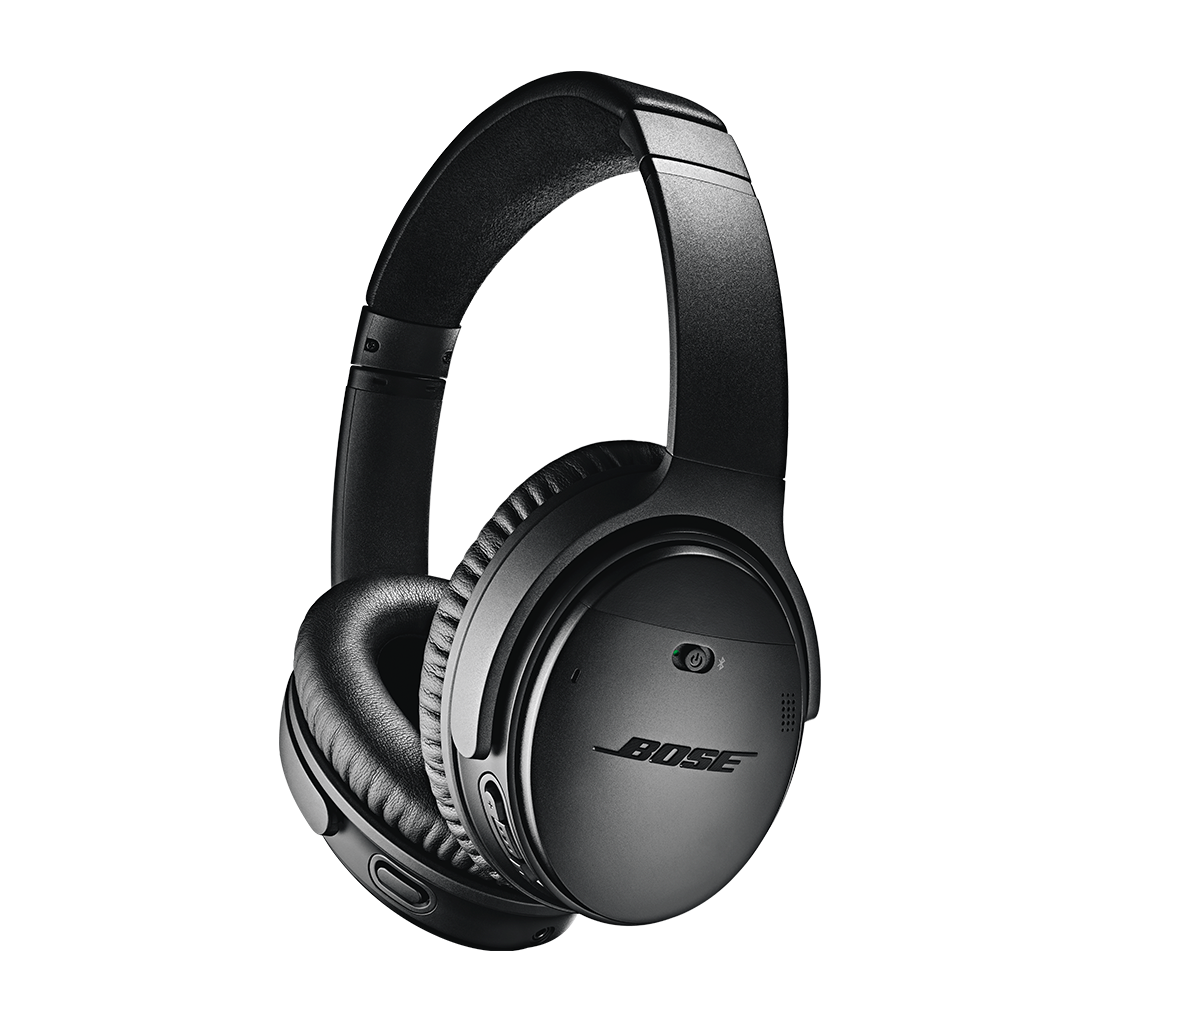 The Bose QC45 are simply great headphones